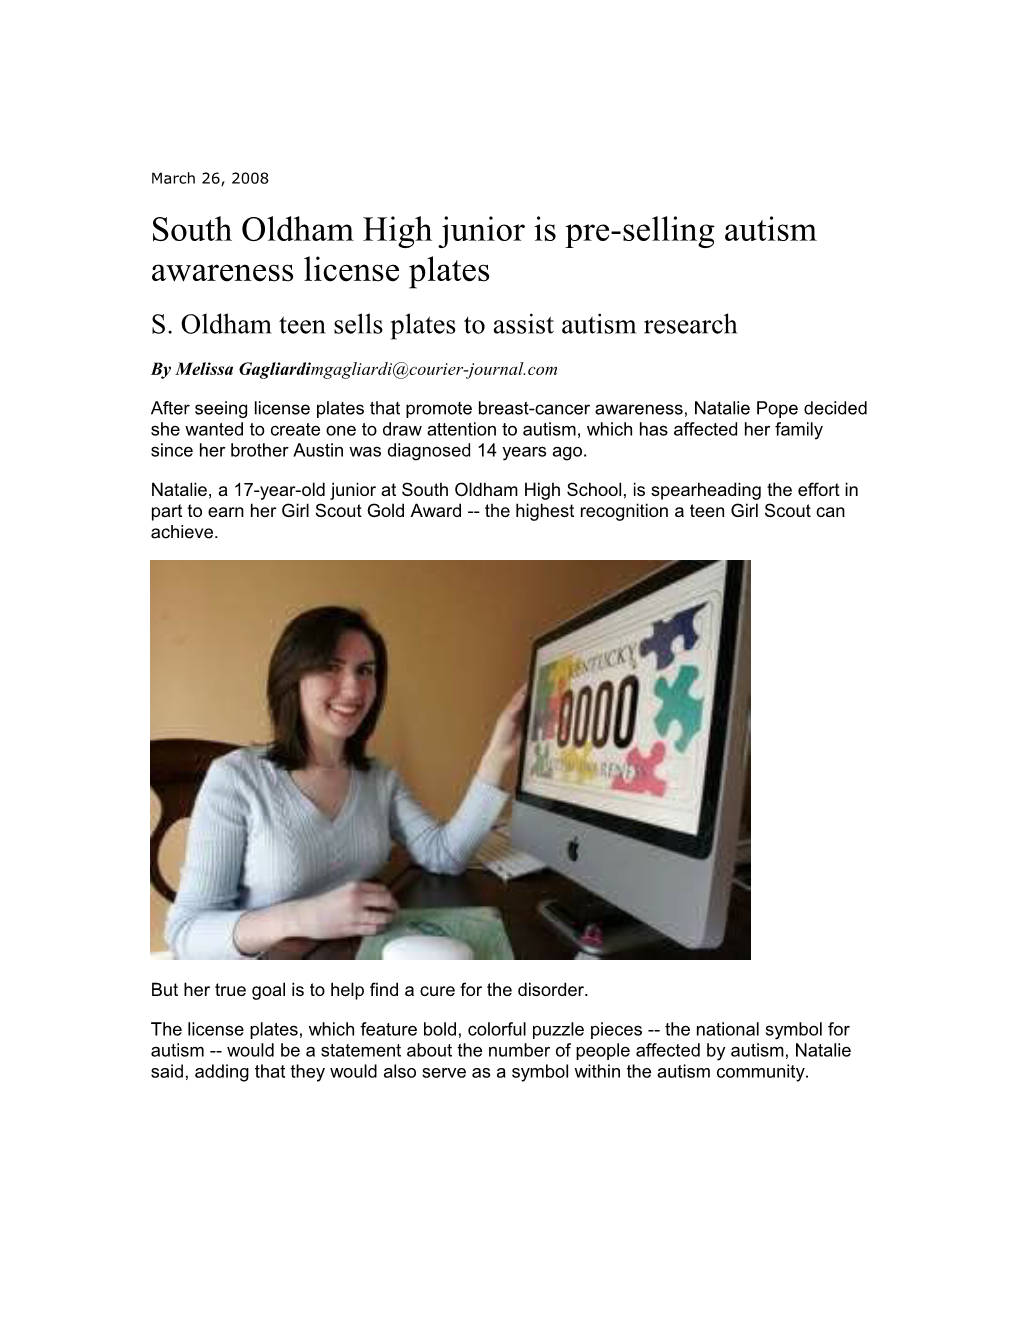 South Oldham High Junior Is Pre-Selling Autism Awareness License Plates